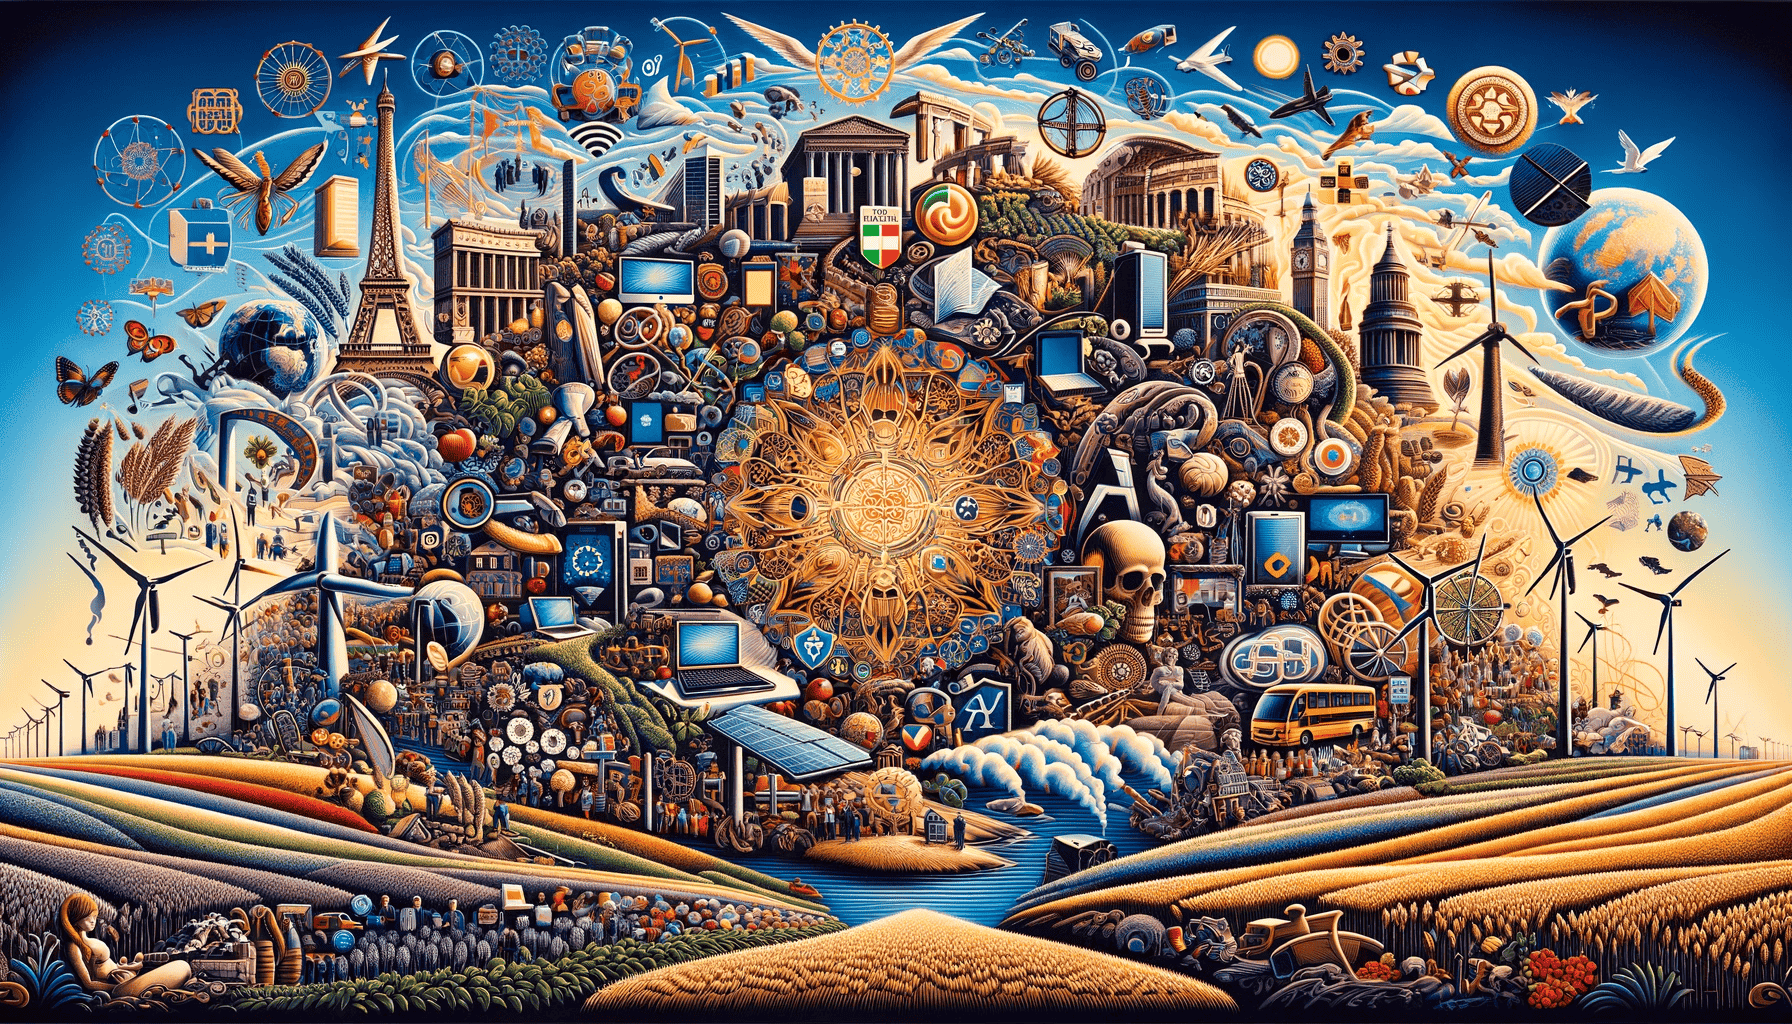 an image, produced by DALL-E, that visually encapsulates the diverse contributions of the 27 European Union countries, interwoven with elements of technology, agriculture, culture, and environmental sustainability. This tapestry-like representation includes iconic landmarks and national symbols from each country, arranged harmoniously to convey a sense of unity, diversity, and progress.